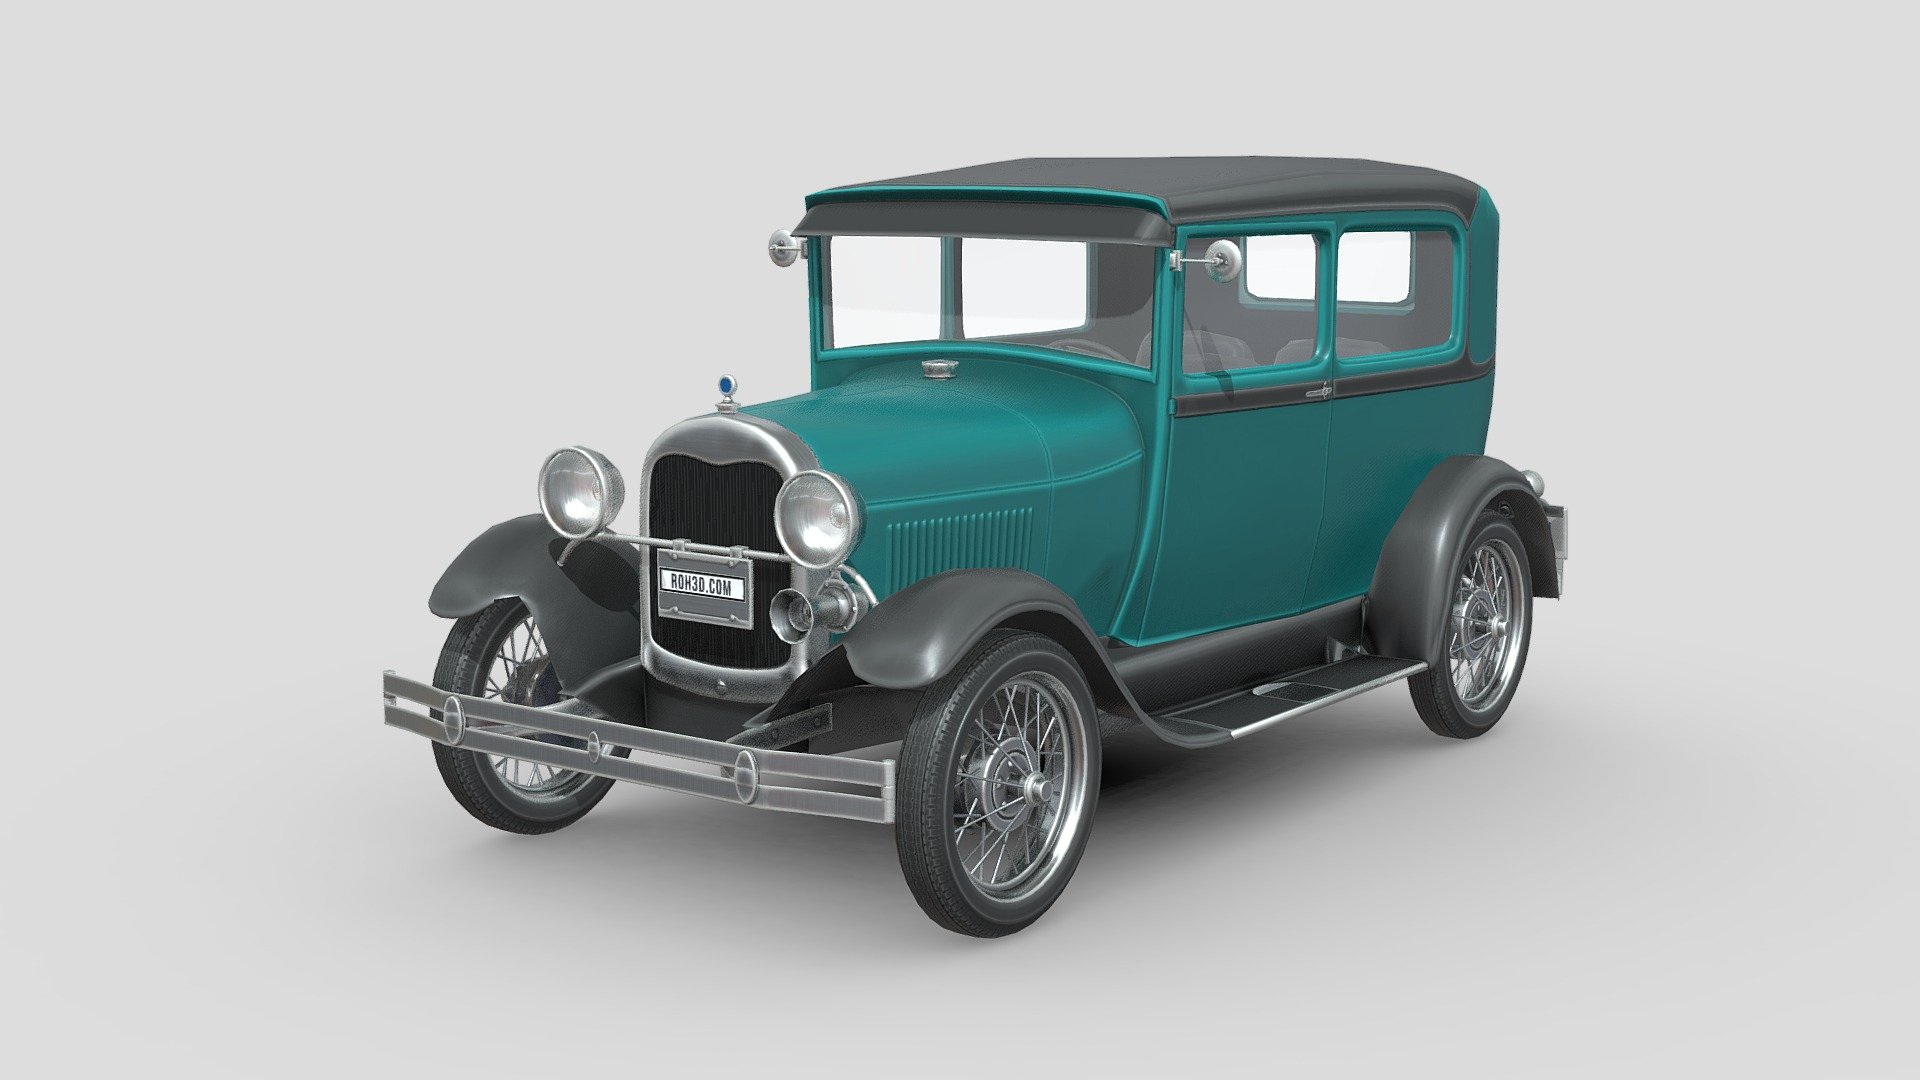 The Ford Model A (also colloquially called the A-Model Ford or the A, and A-bone among hot rodders and customizers) was the Ford Motor Company's second market success, replacing the venerable Model T which had been produced for 18 years. It was first produced on October 20, 1927, but not introduced until December 2. This new Model A (a previous model had used the name in 1903–04) was designated a 1928 model and was available in four standard colors. The vehicle was also sold in Europe, but was replaced by locally built cars such as the Ford Model Y.

By February 4, 1929, one million Model As had been sold, and by July 24, two million. The range of body styles ran from the Tudor at US$500 (in grey, green, or black) ($7,536 in 2020 dollars) to the town car with a dual cowl at US$1,200 ($18,086 in 2020 dollars). In March 1930, Model A sales hit three million, and there were nine body styles available.

Source: Wikipedia - Low Poly Car - Ford Model A 1928 - Buy Royalty Free 3D model by ROH3D 3d model